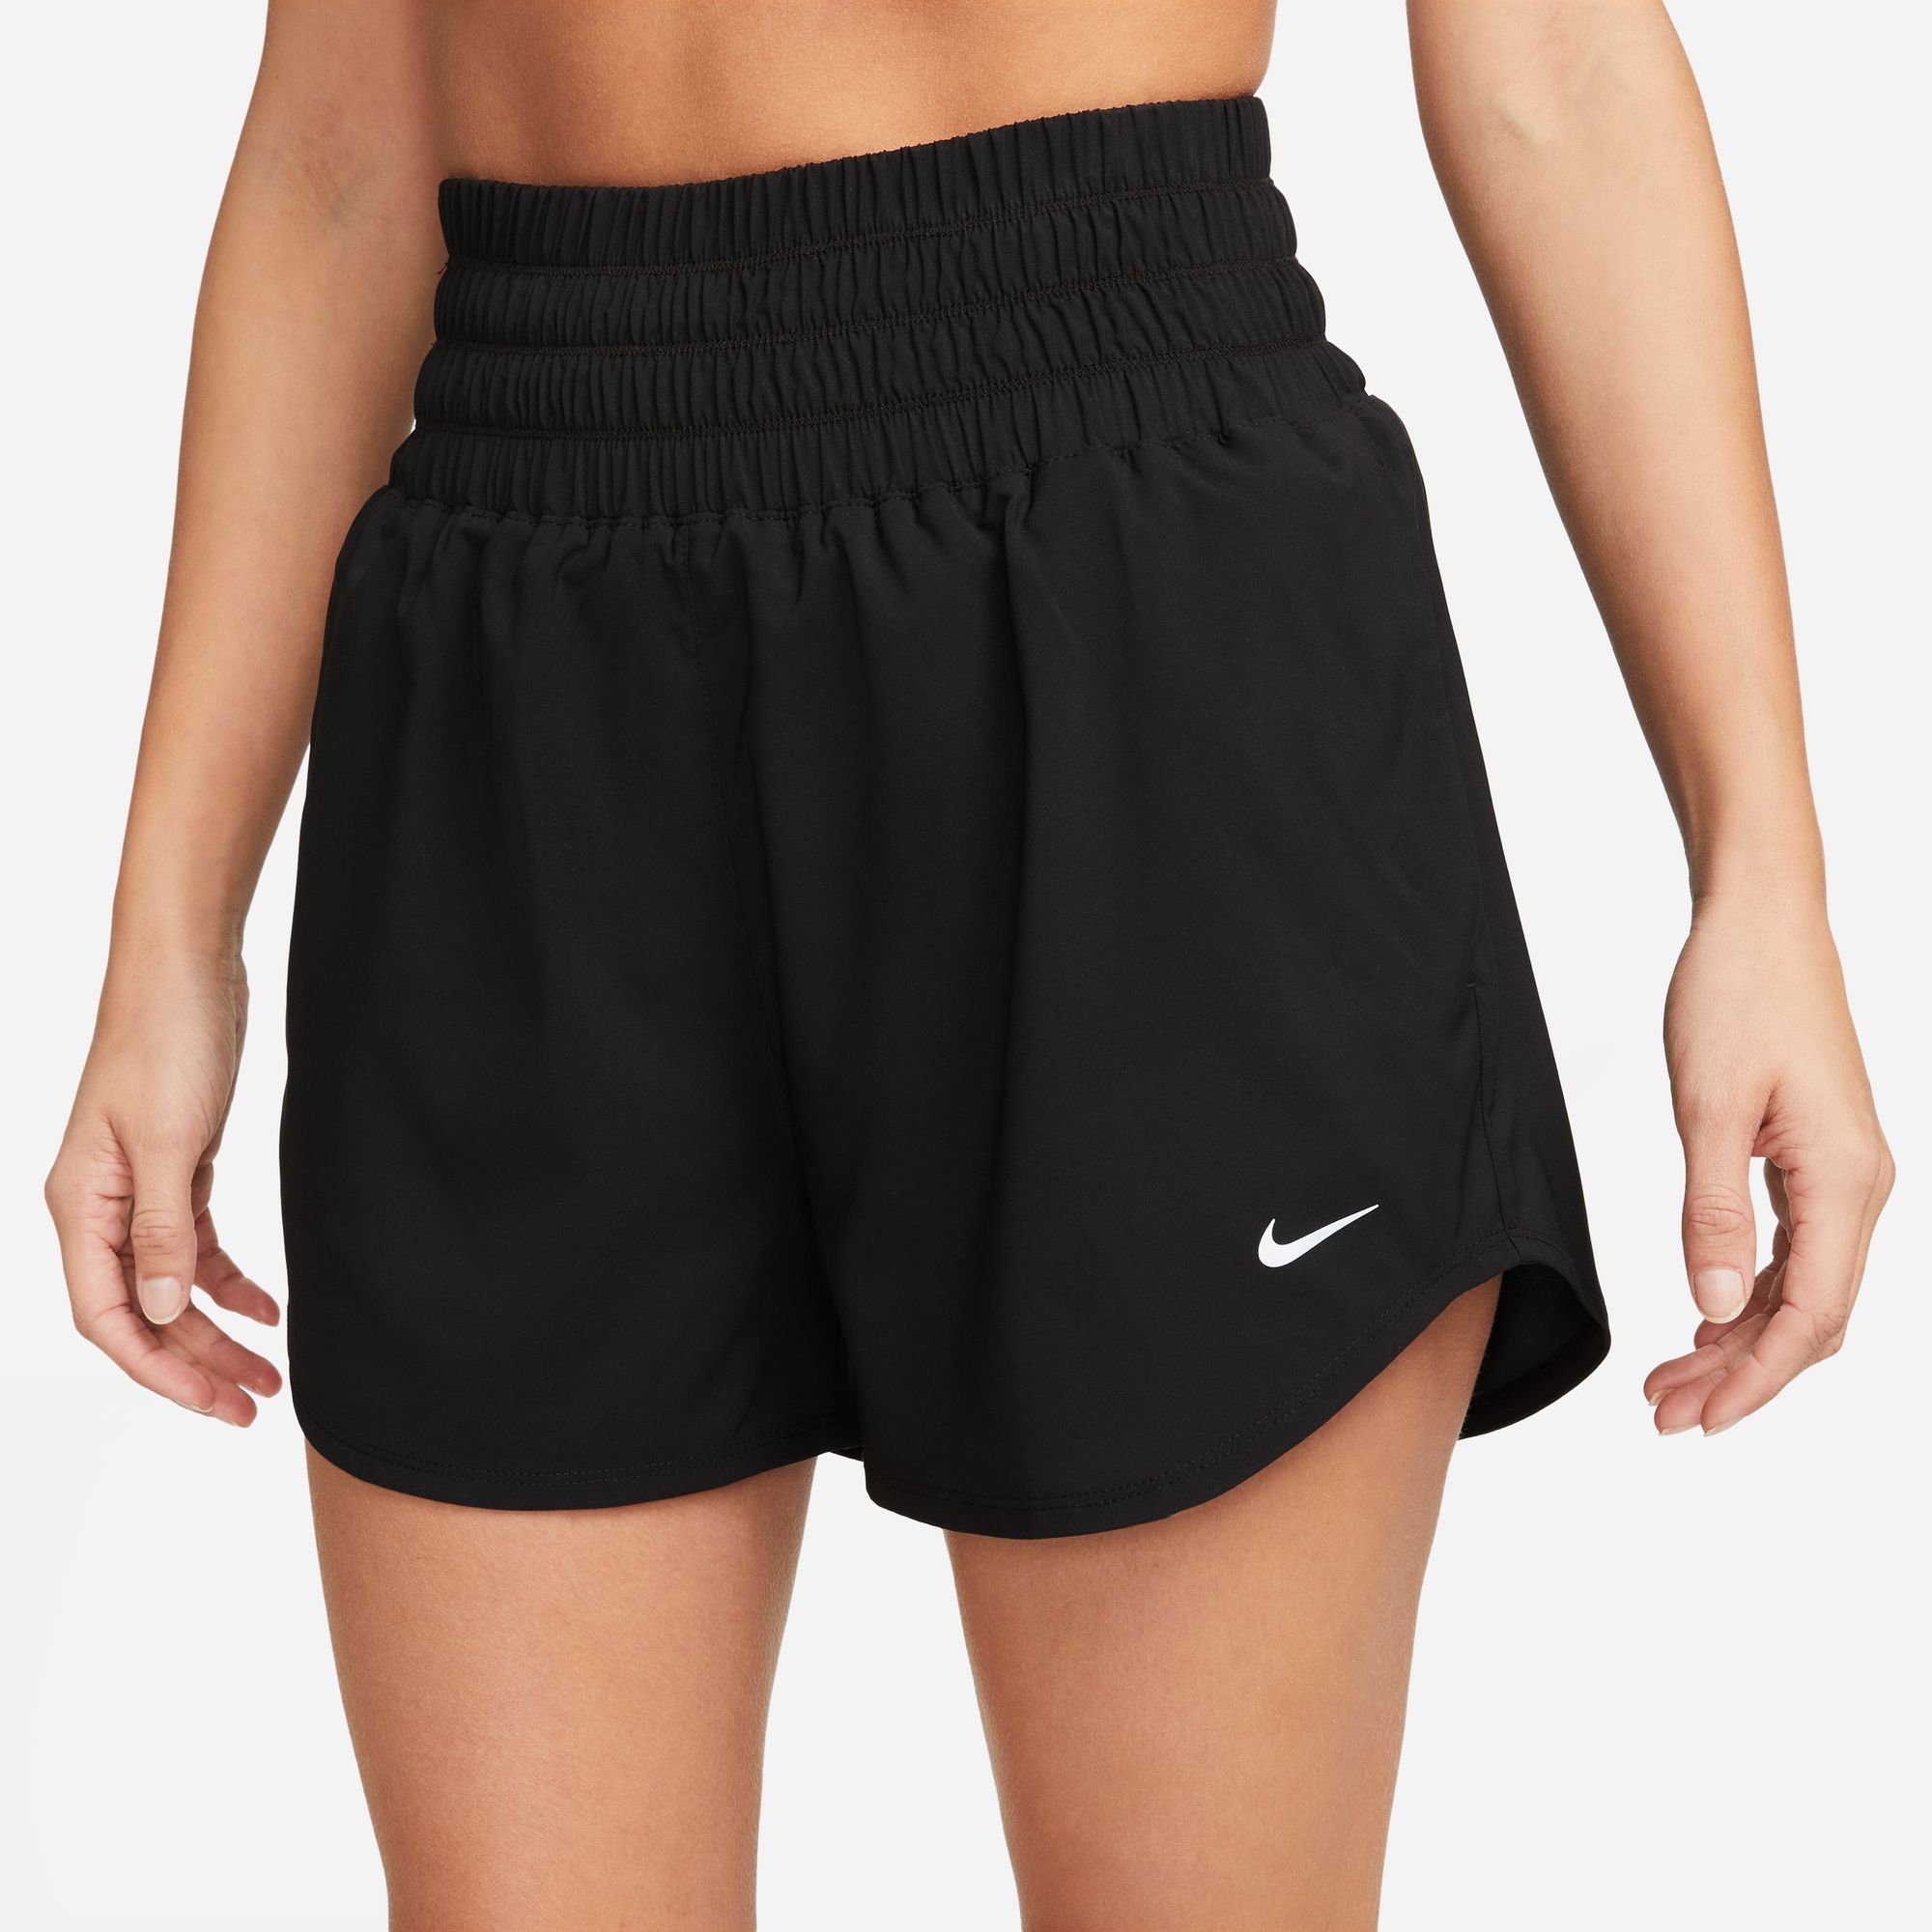 ONE WOMEN'S BRIEF-LINED HIGH-WAISTED DRI-FIT Nike ULTRA Trainingsshorts SHORTS